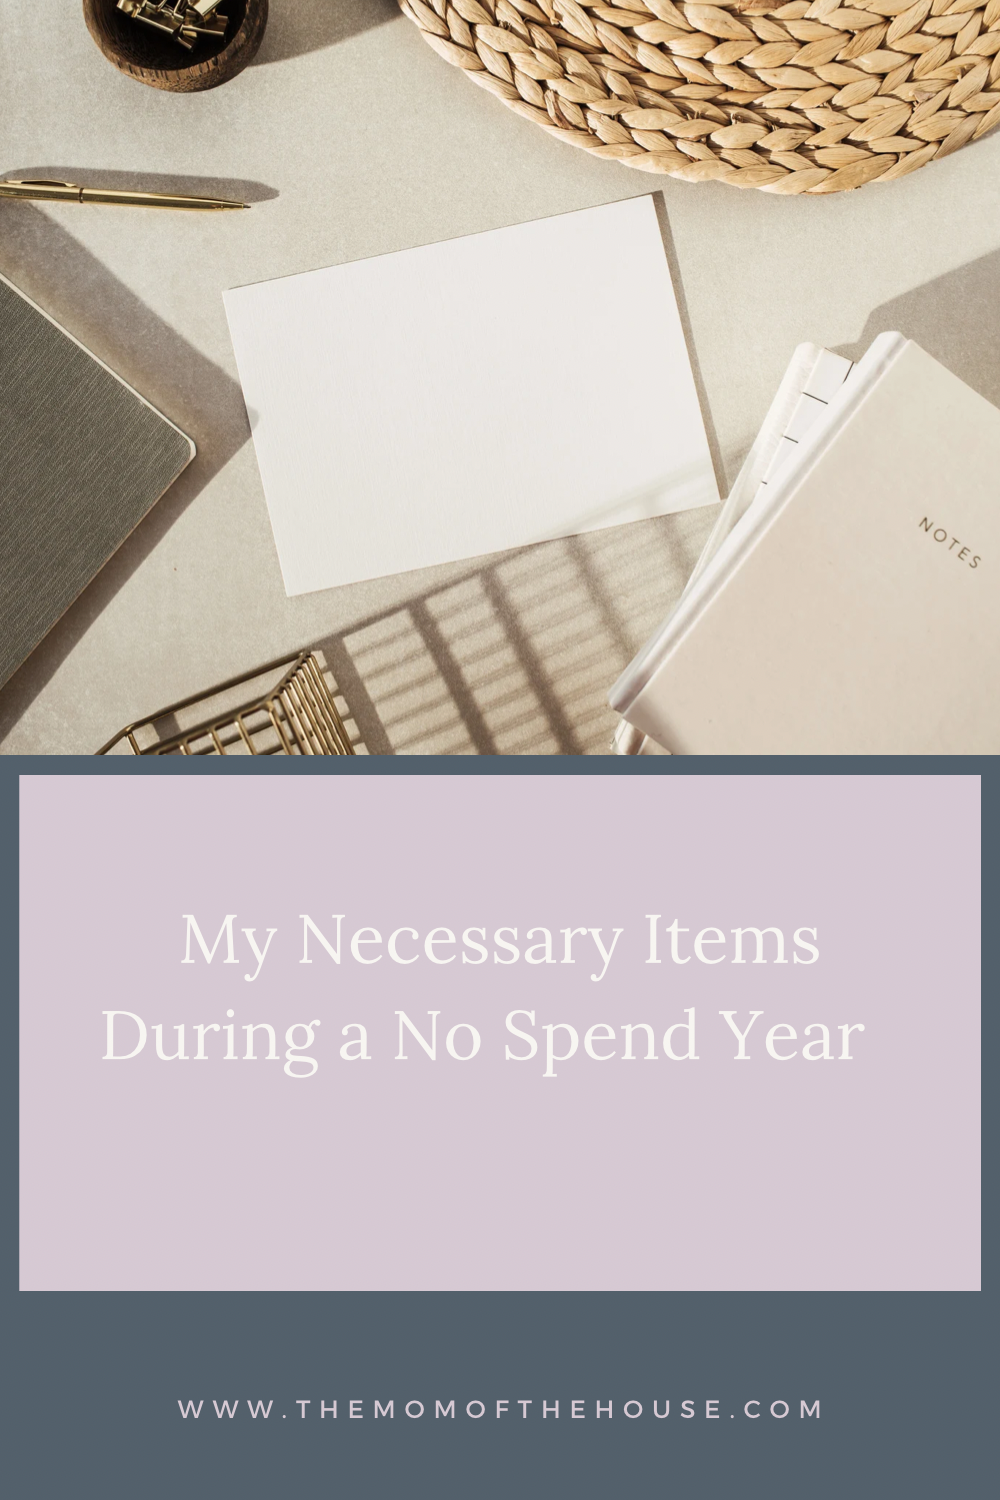 My Necessary Items During a No Spend Year